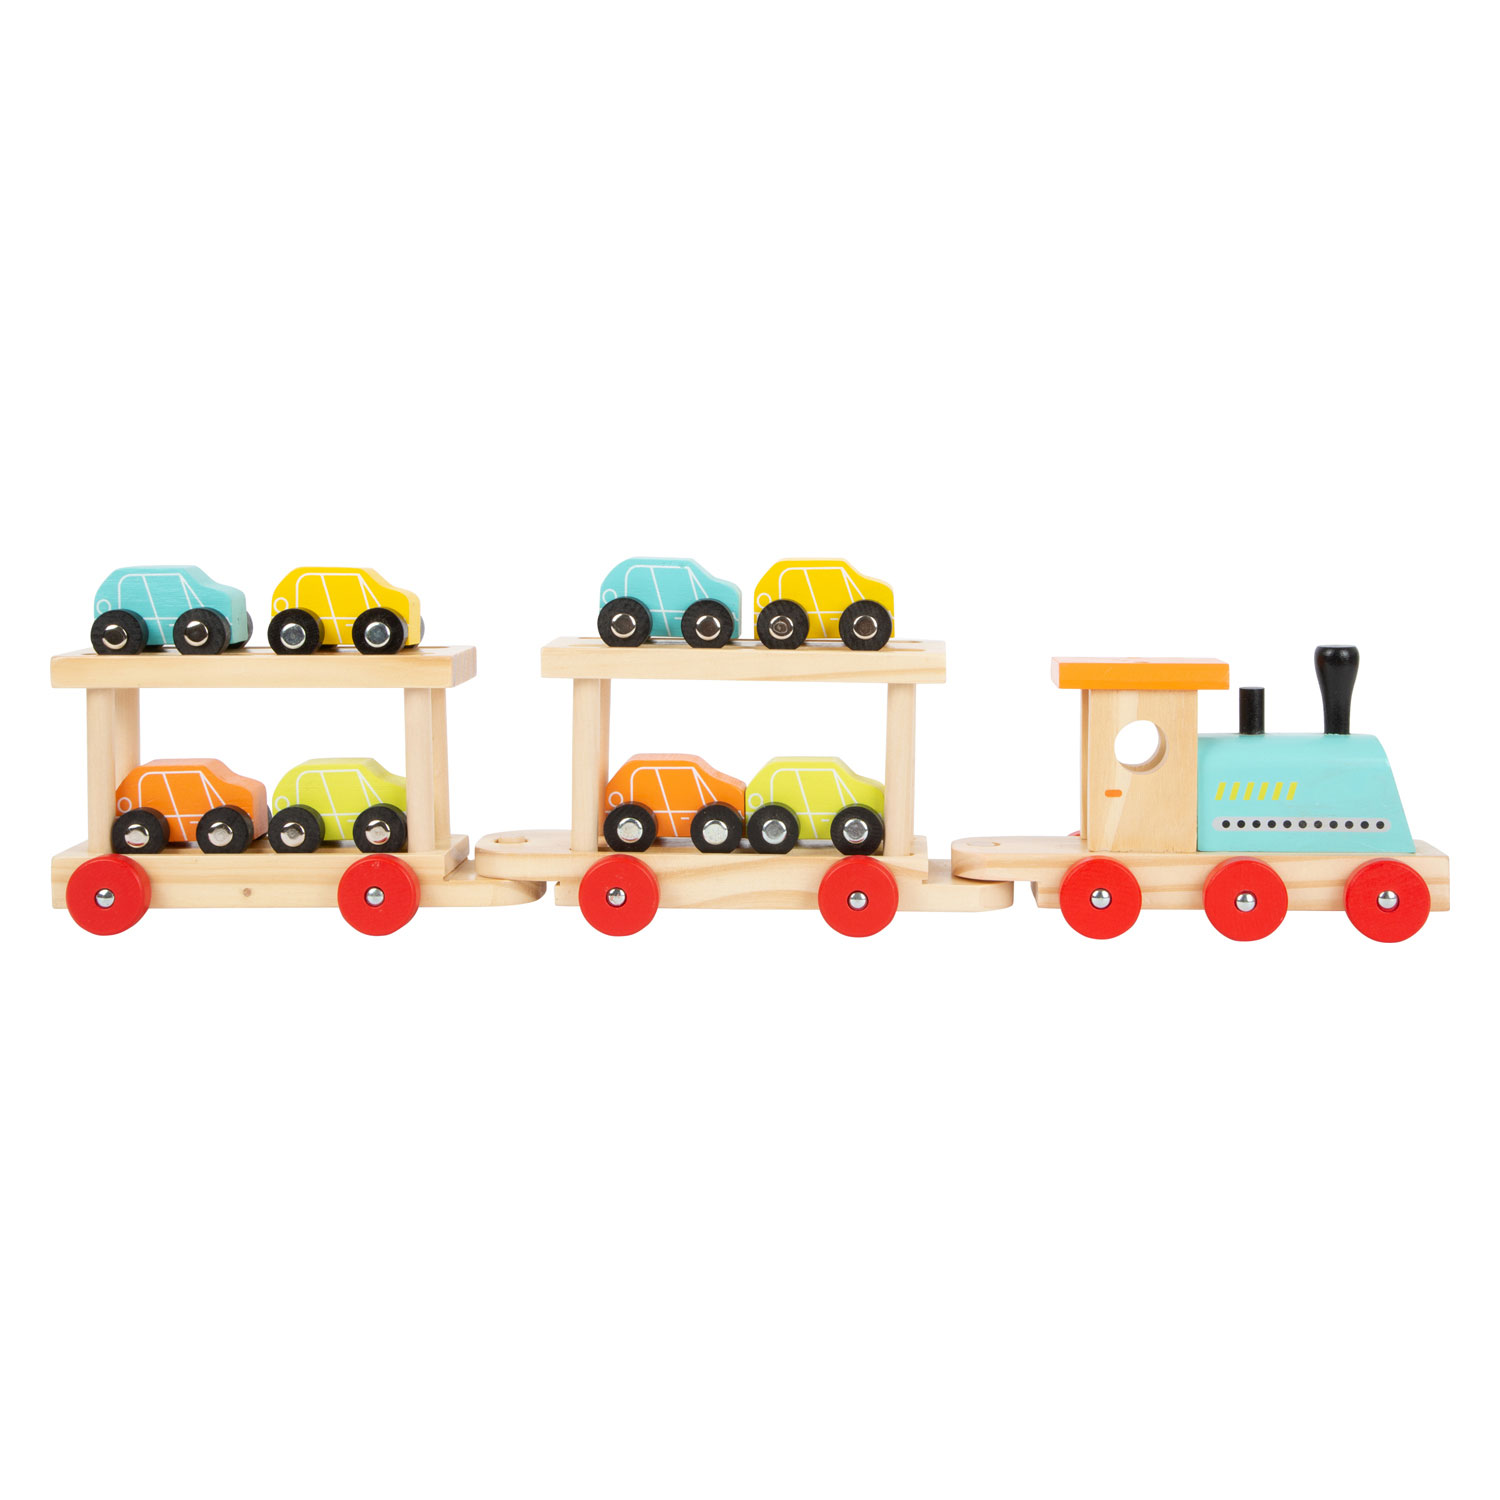 Small Foot - Holztransporter mit Waggons, 11dlg.